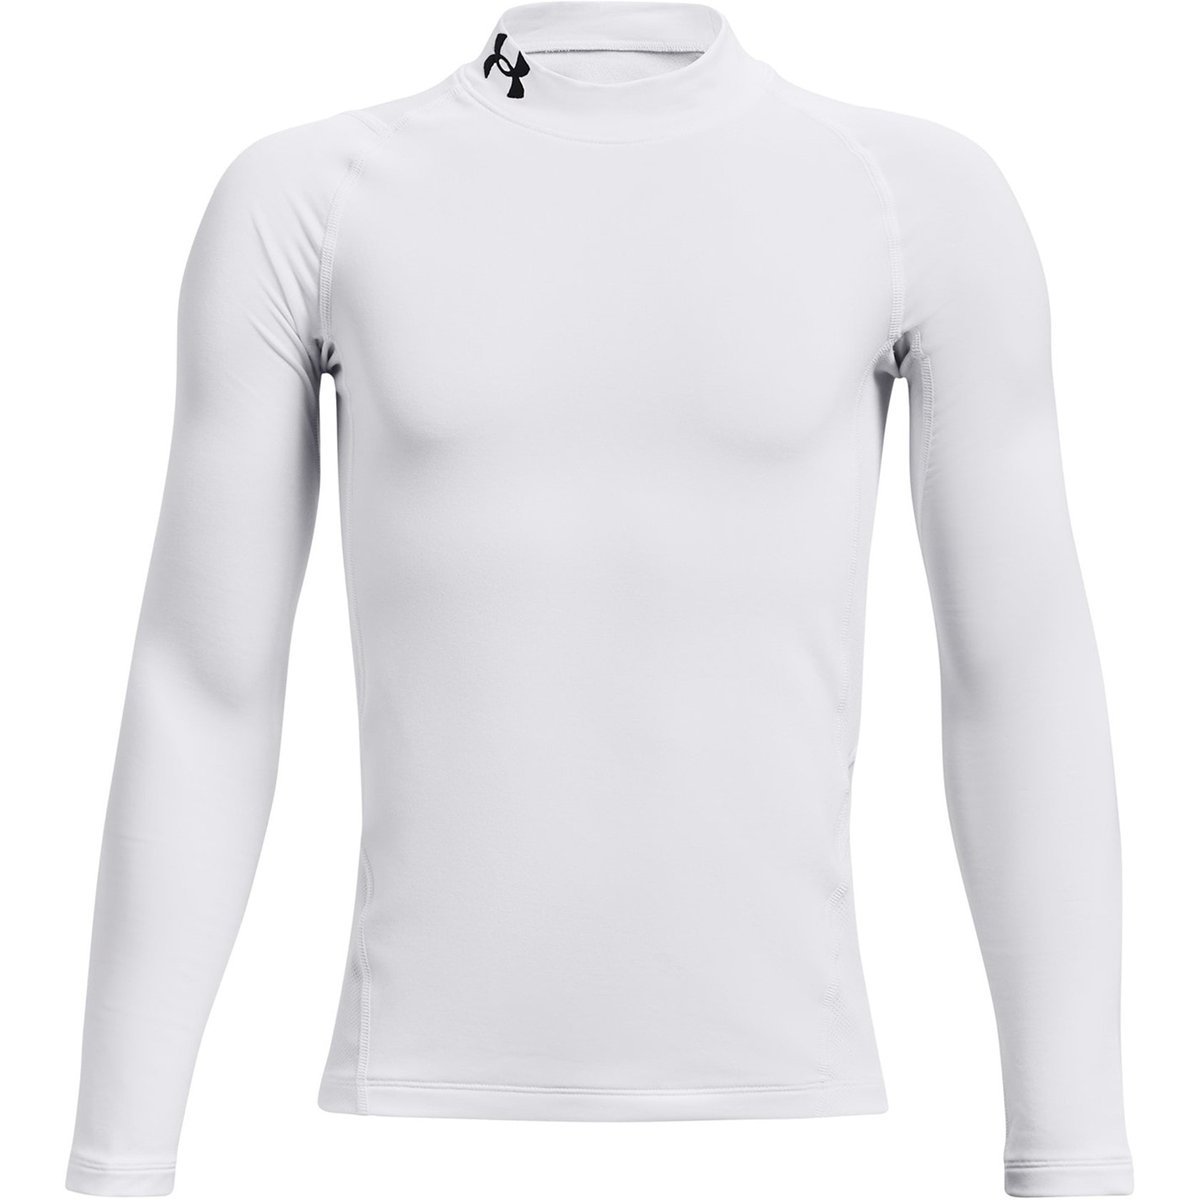 Under Armour white base layer long sleeve top